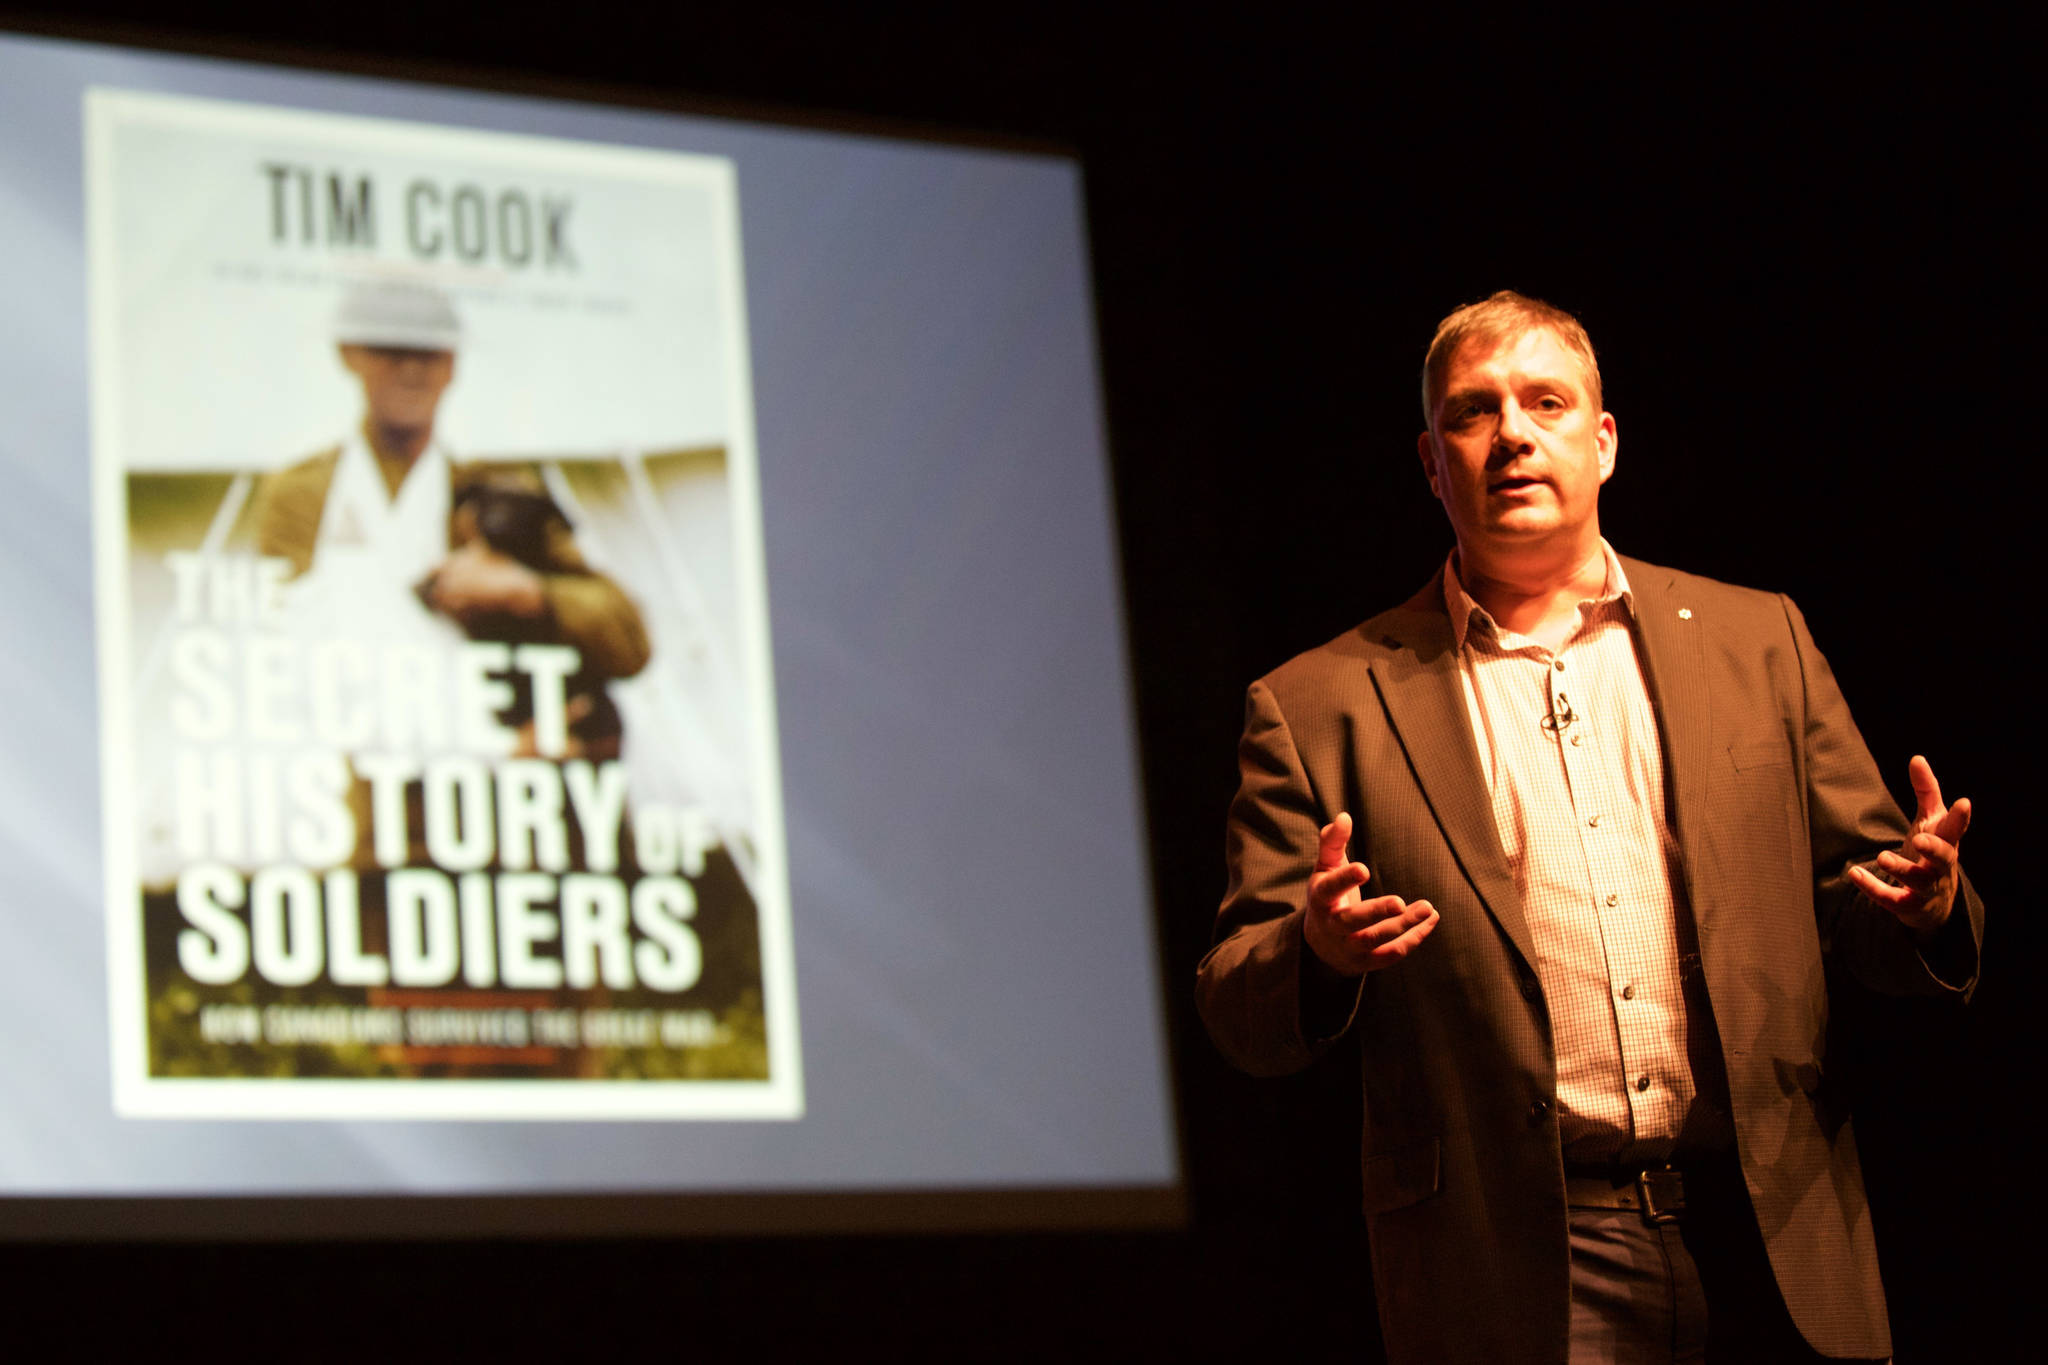 Award-winning historian and author Tim Cook gave a talk about his latest book, The Secret History of Soldiers, at Red Deer College’s long-running speakers’ series, Perspectives: Canada in the World, on Thursday. Robin Grant/Red Deer Express